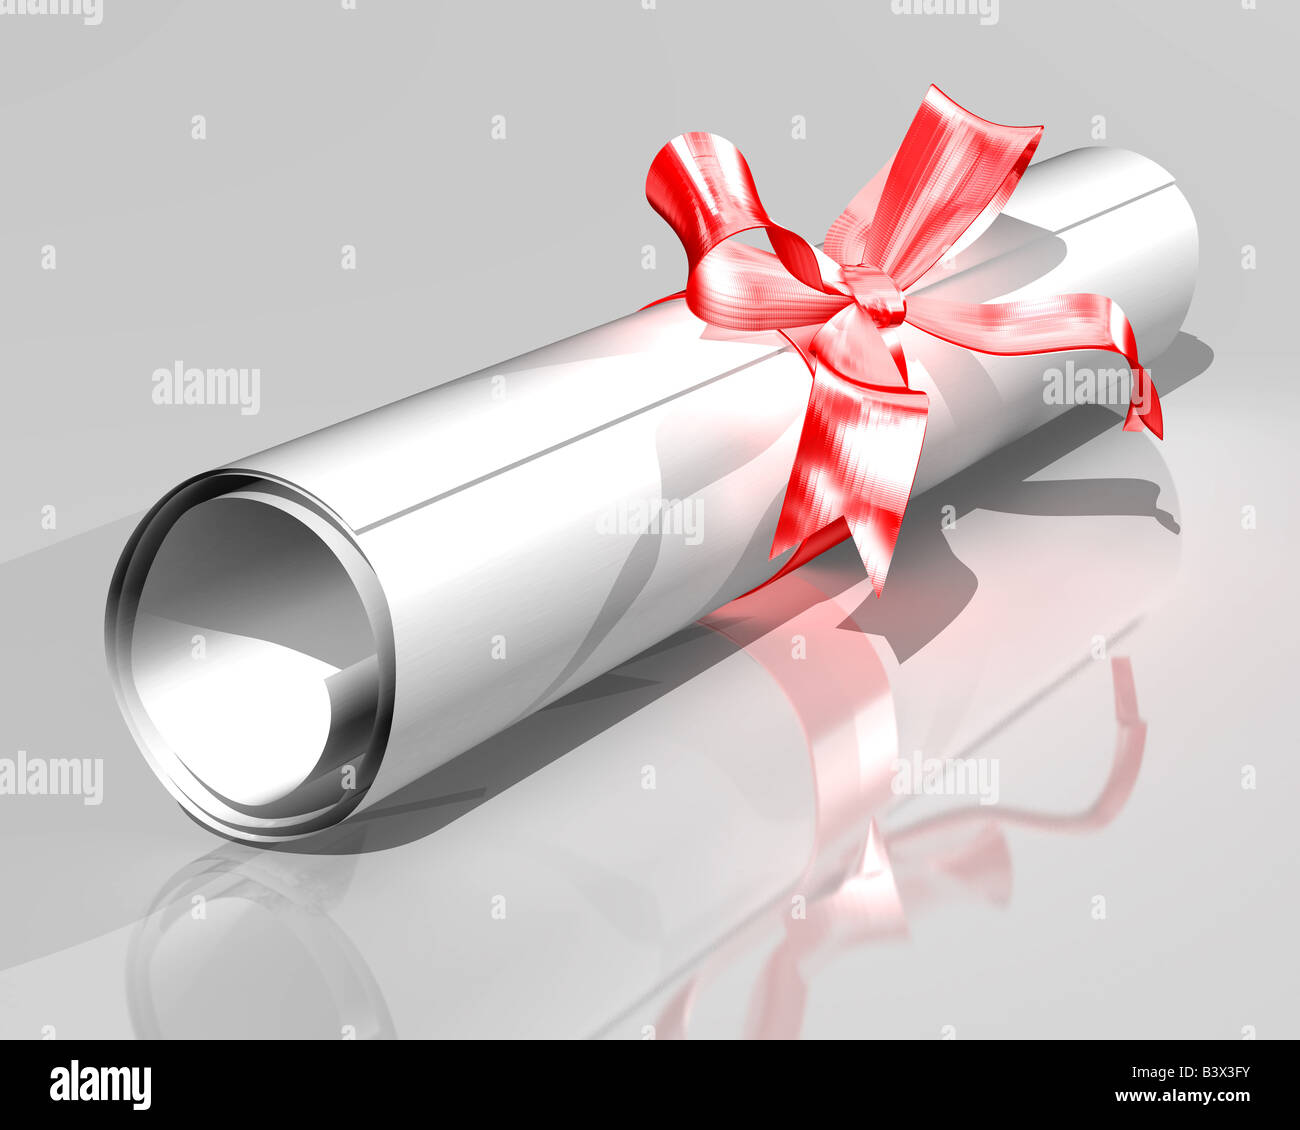 Illustration of a diploma rolled into a scroll and tied with a ribbon Stock Photo